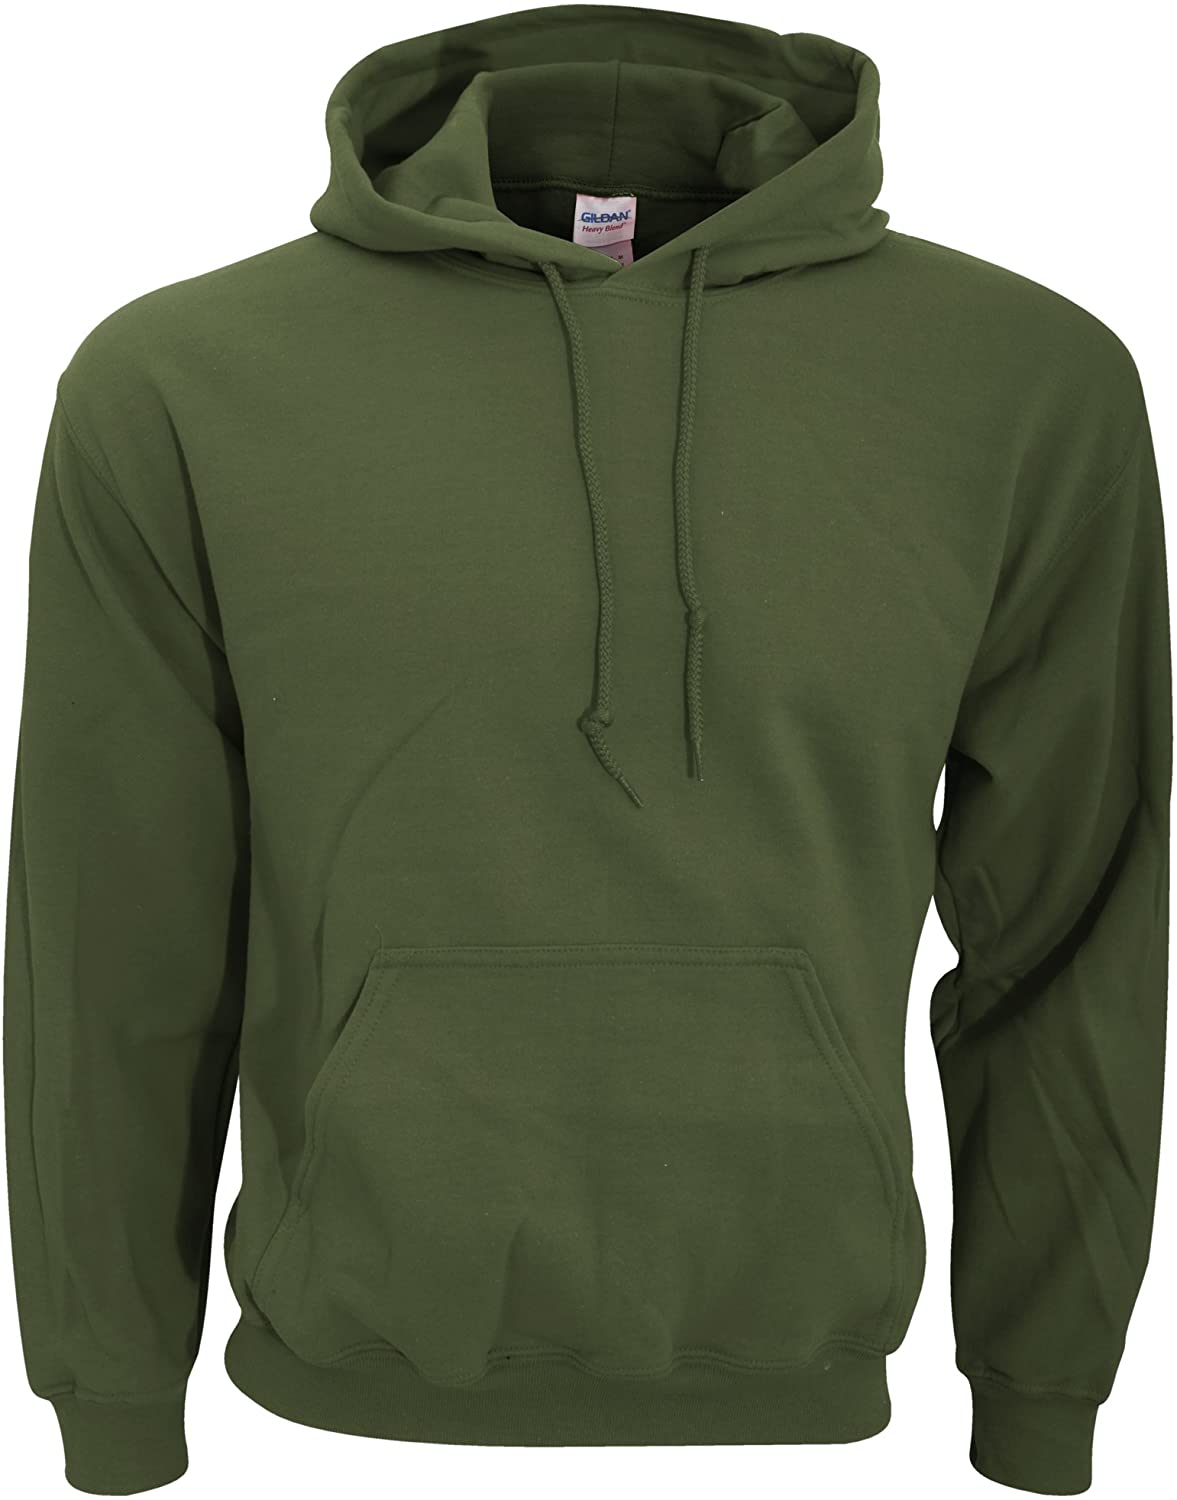 Hooded Pullover Sweat Shirt Heavy Blend 50/50 7.75 oz. by Gildan (Style ...